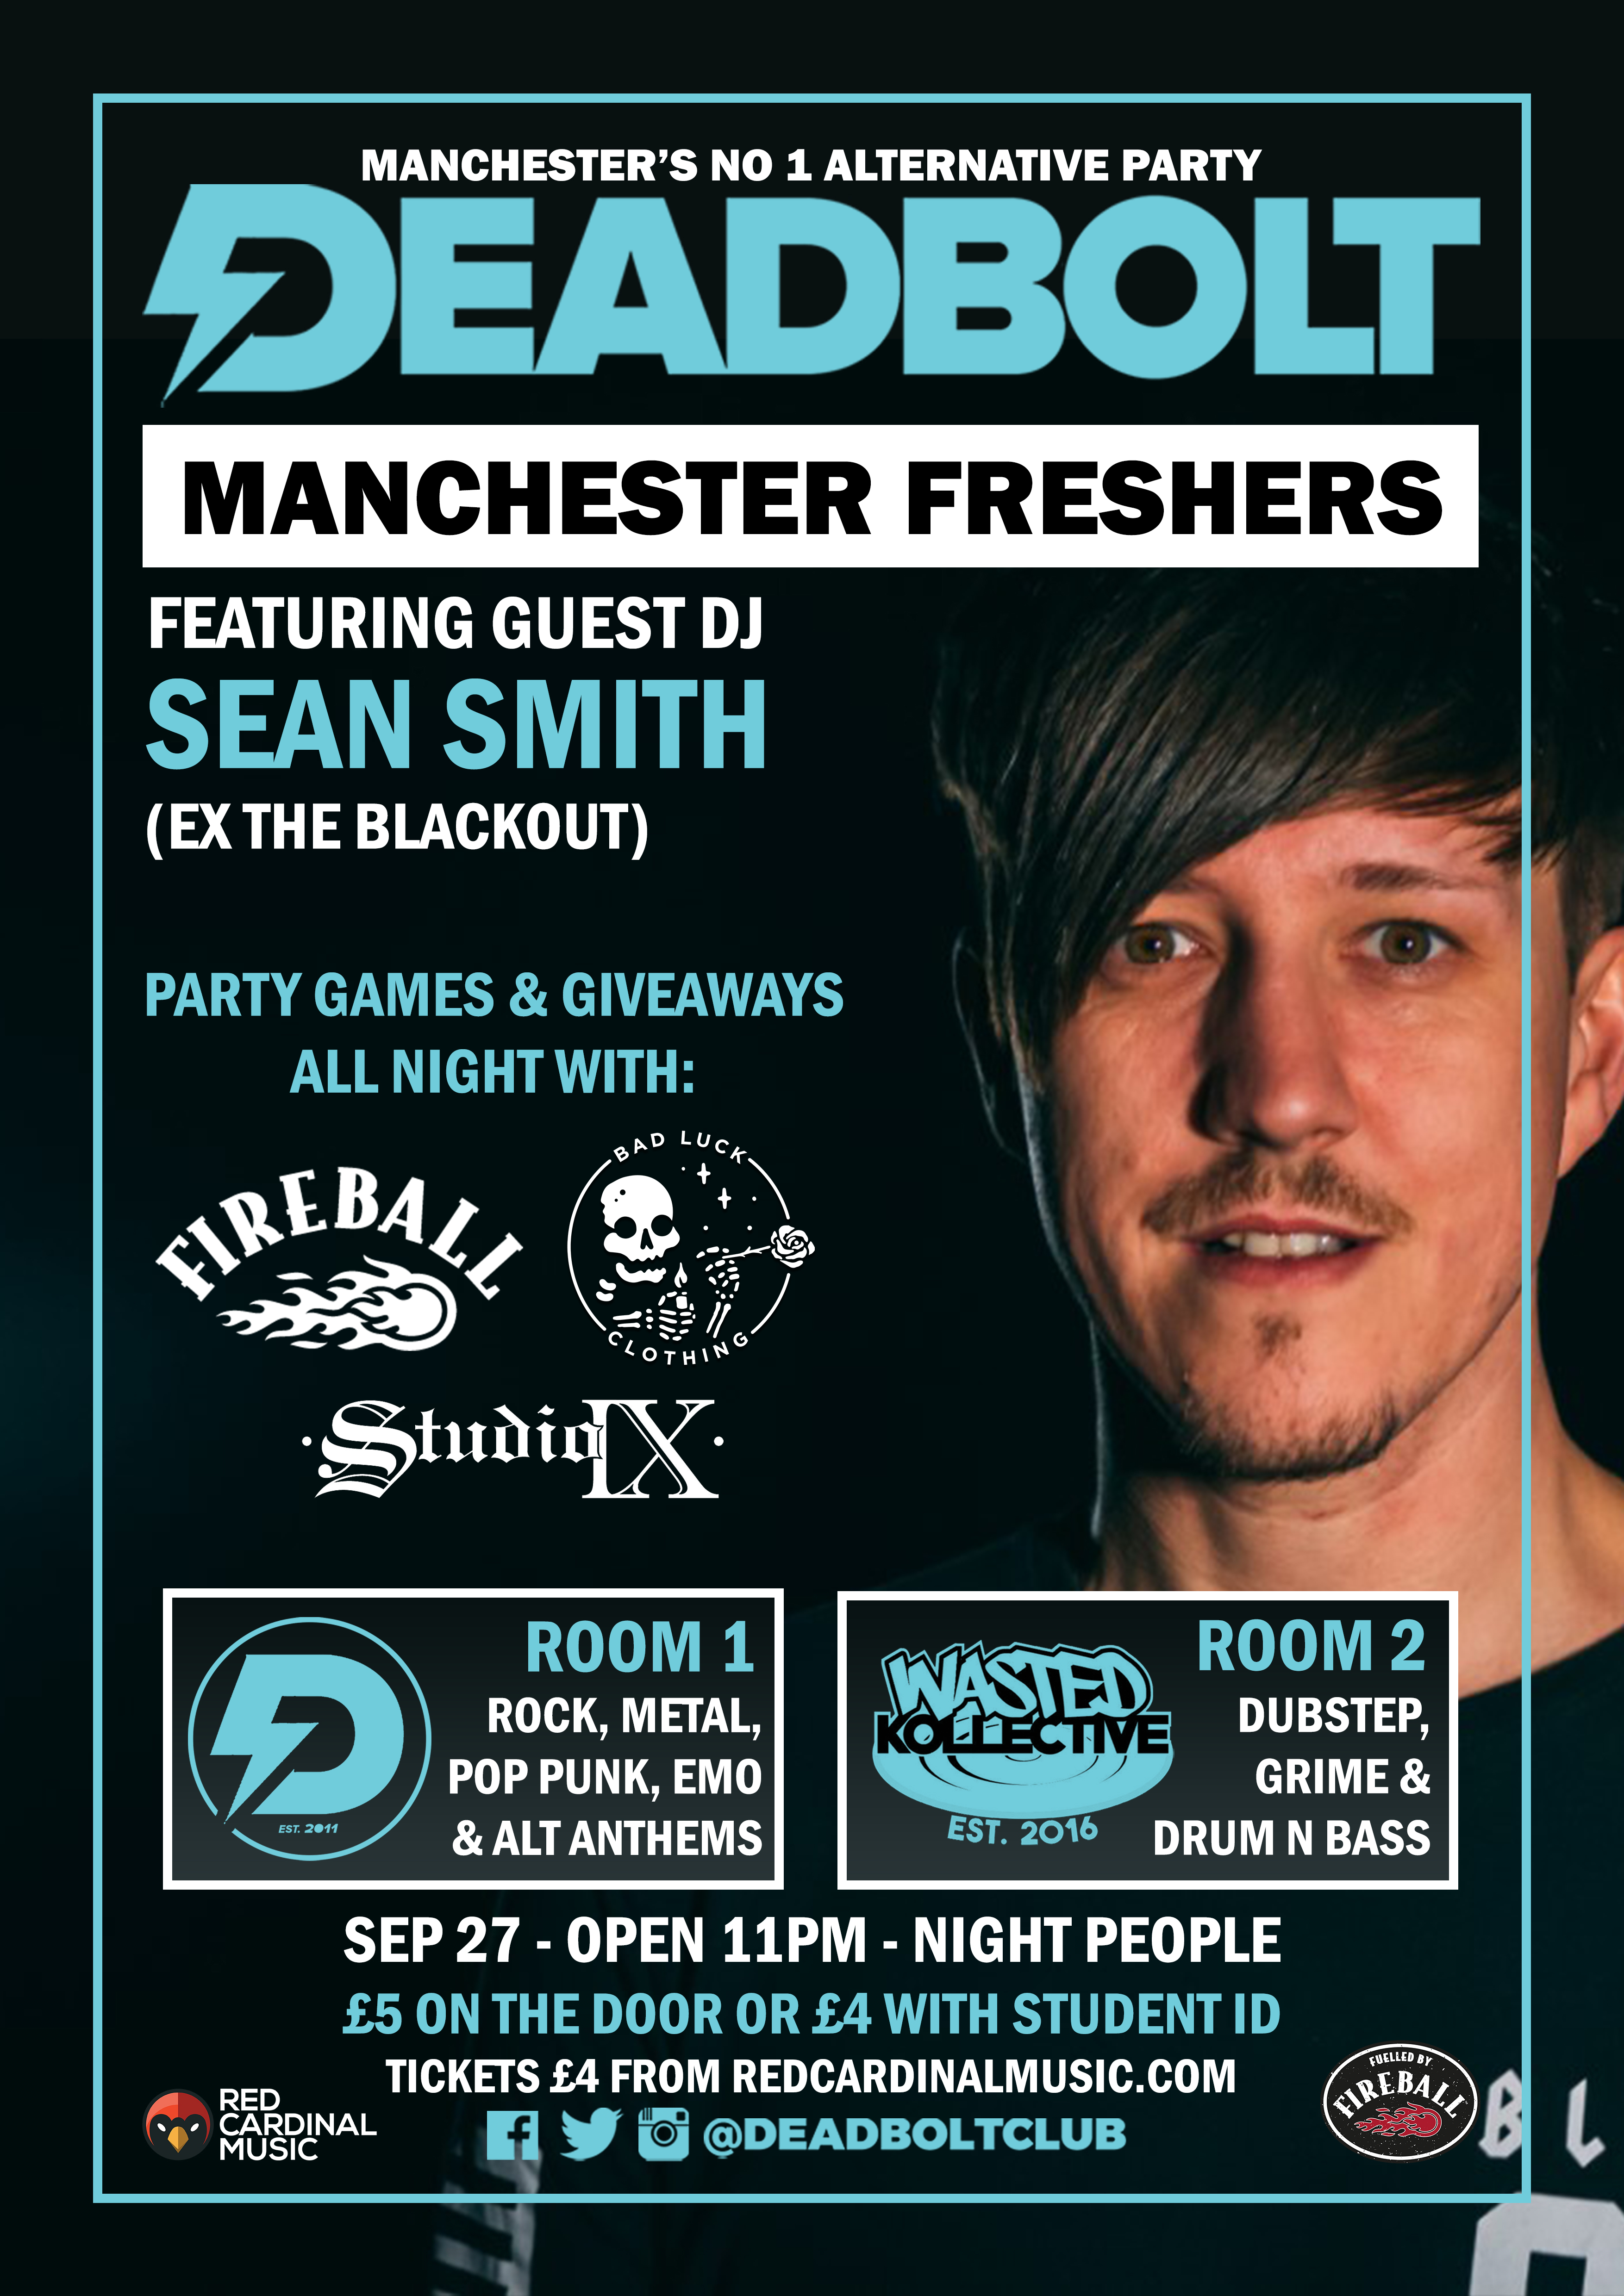 Deadbolt Manchester Alternative Freshers 2019 with Sean Smith & Wasted Kollective - Poster - Red Cardinal Music